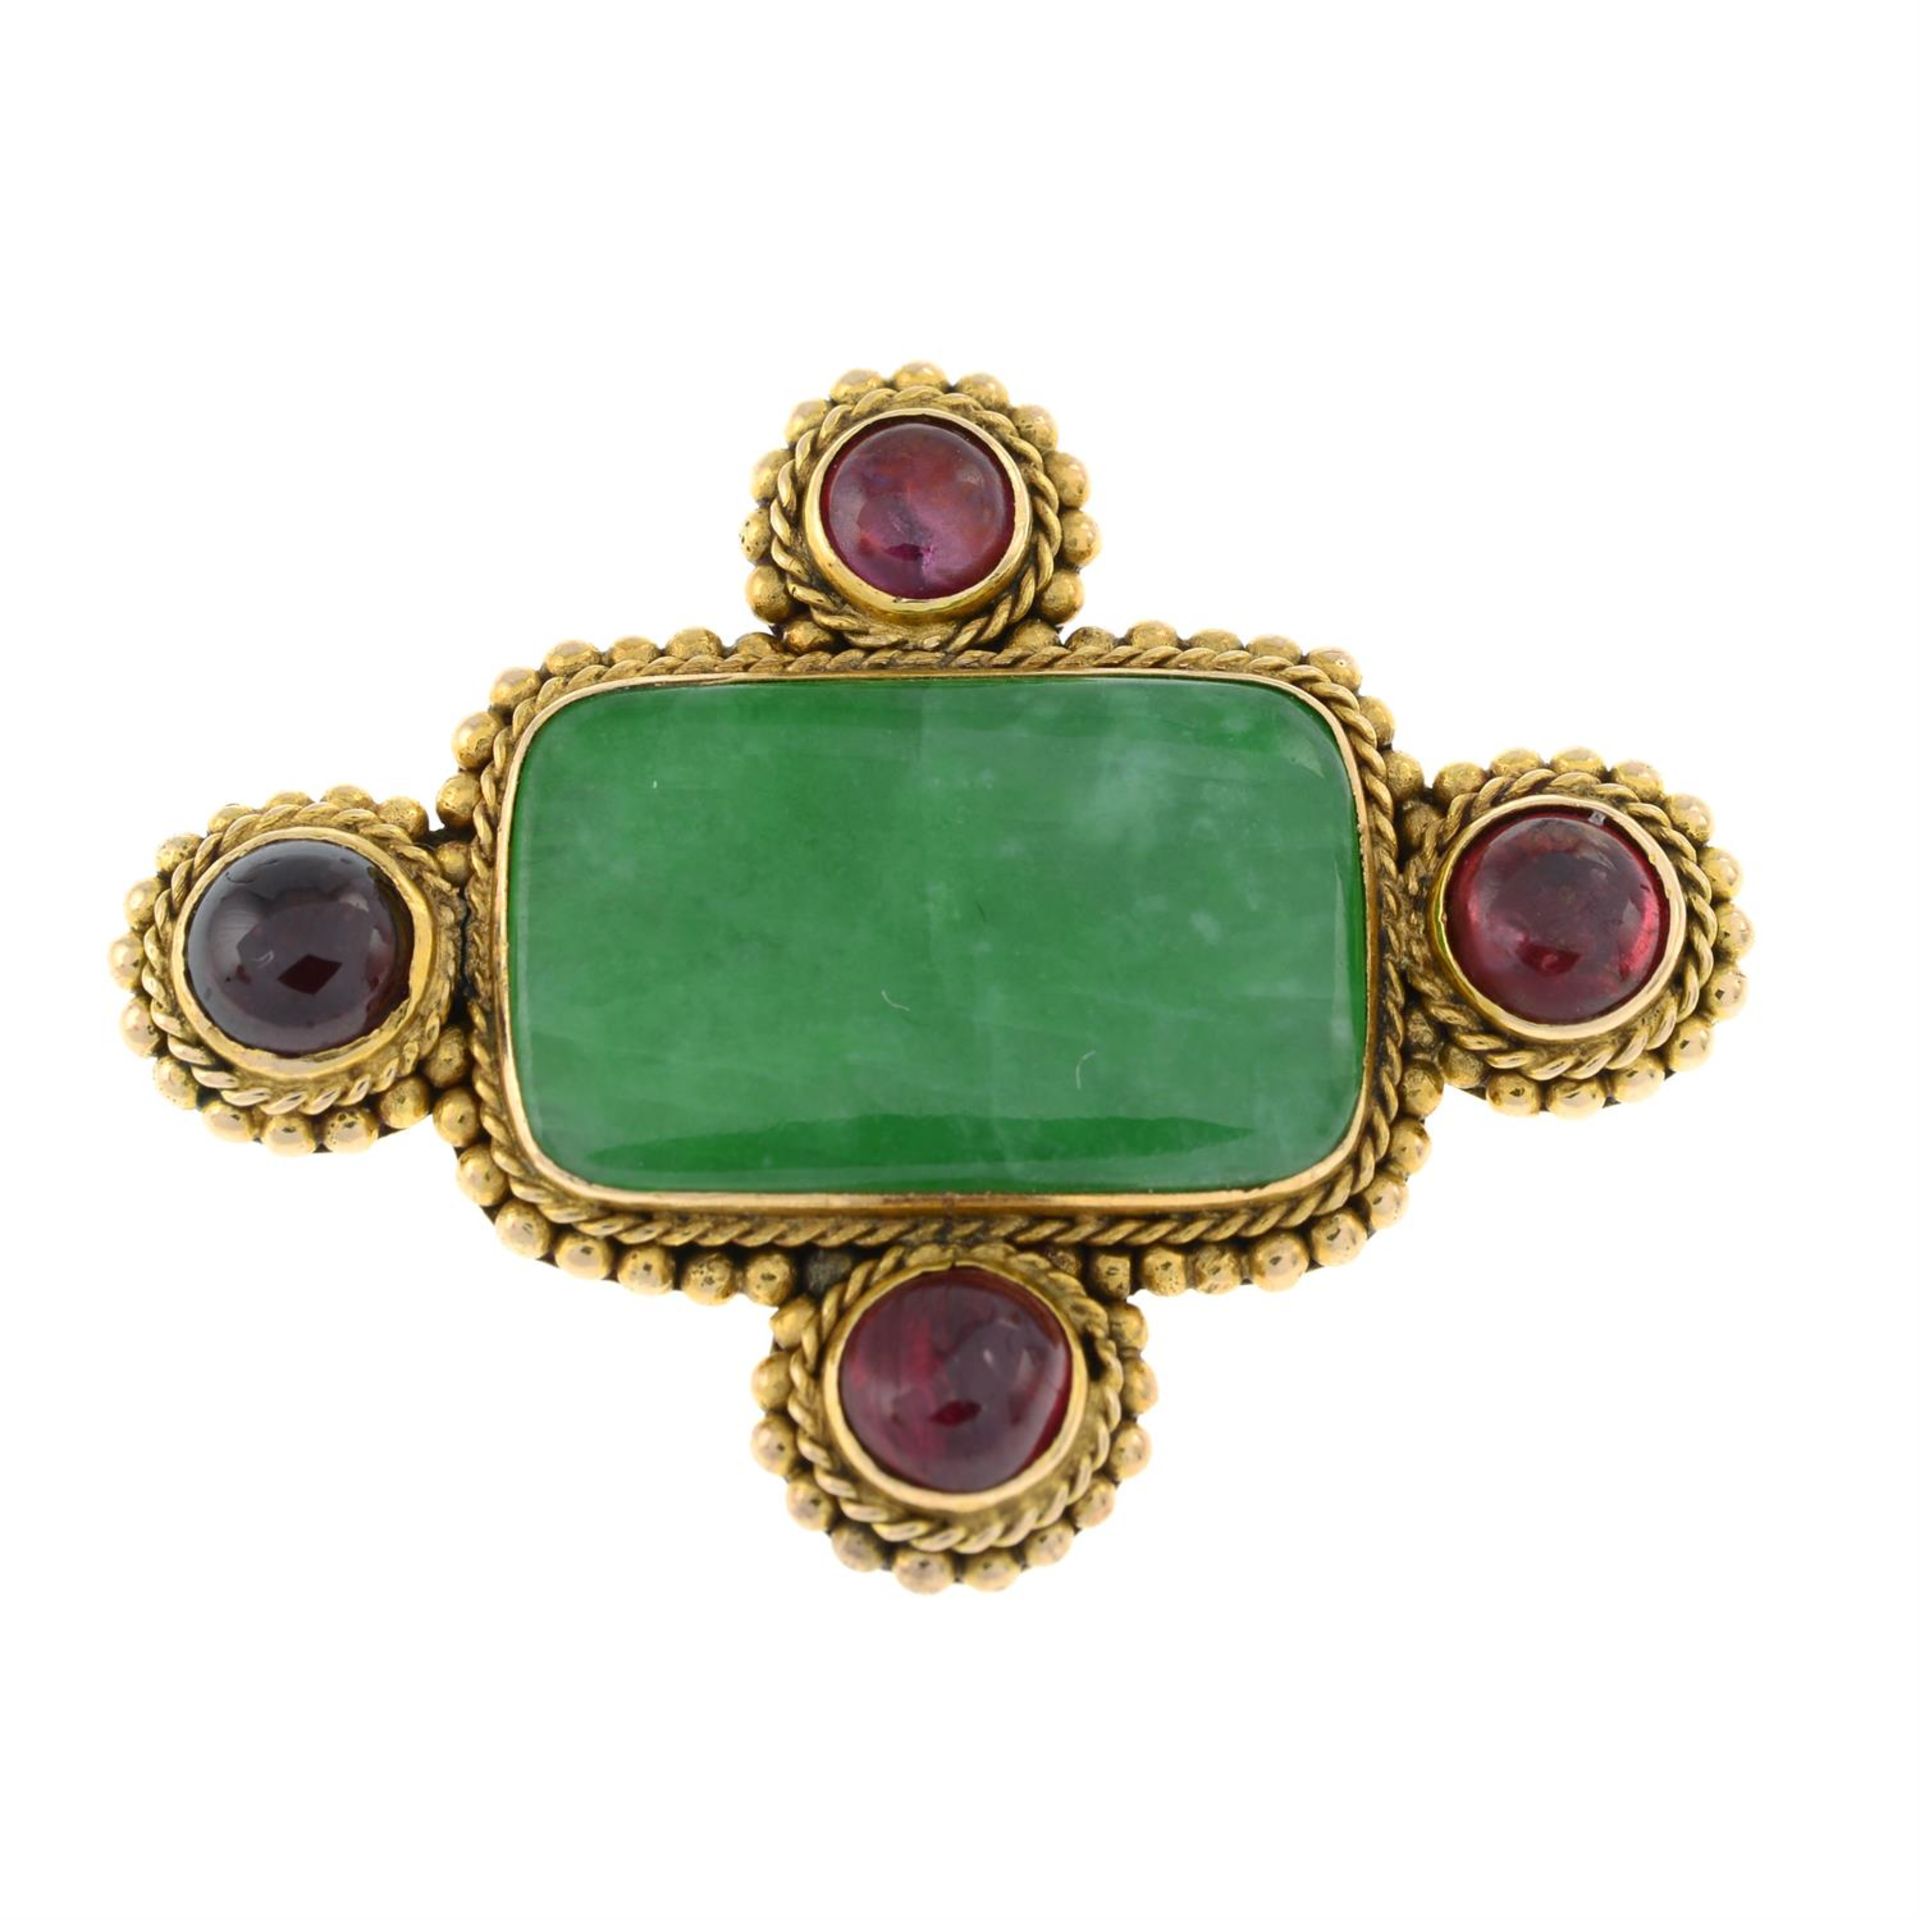 A mid 20th century gold jade and garnet panel brooch. - Image 2 of 4